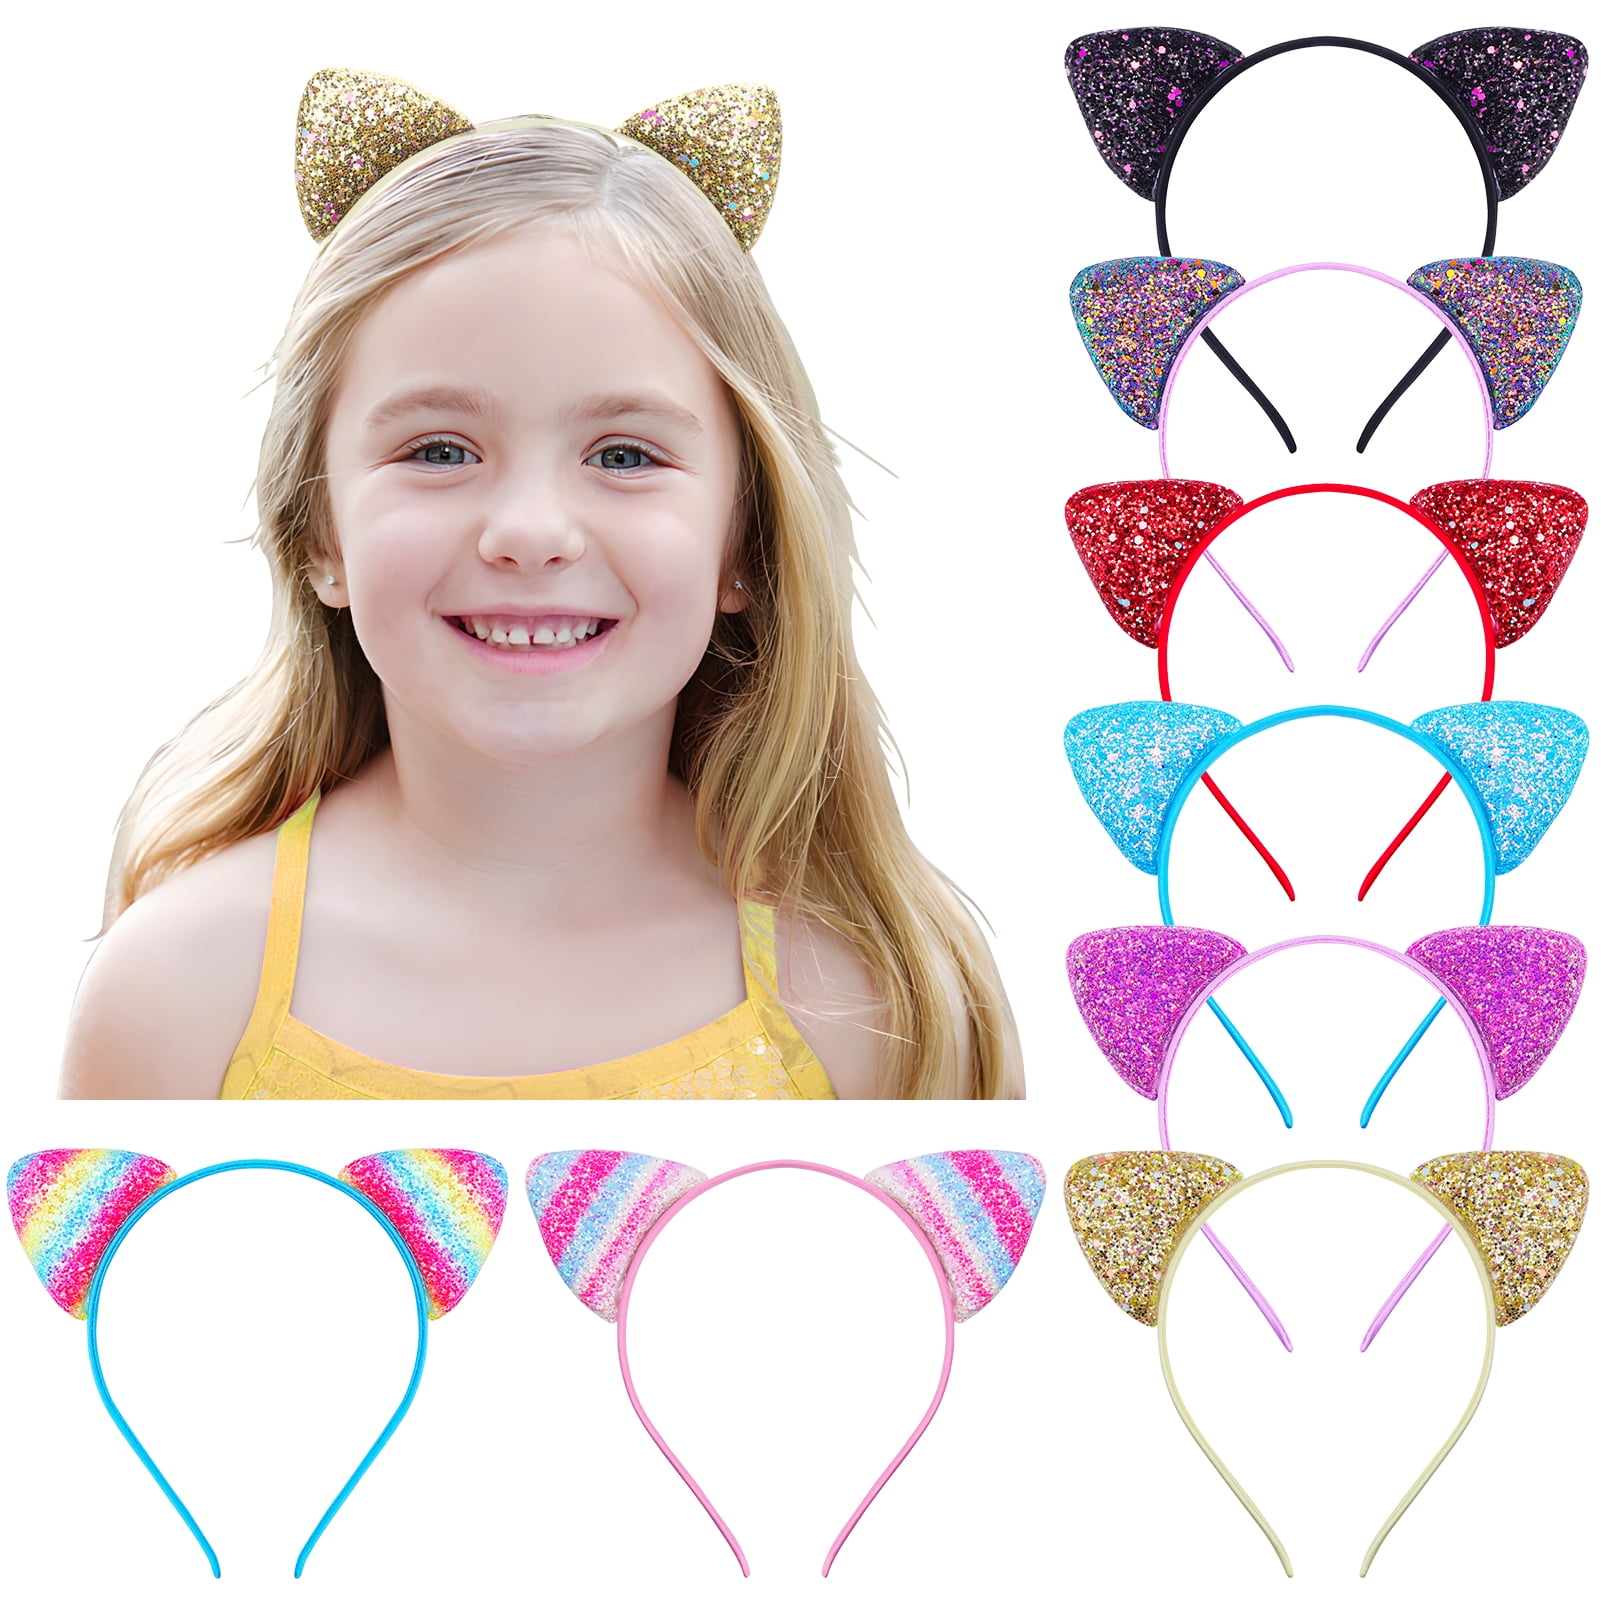 Toplive Cat Ears Headband for Girls and Women, Bling Headbands with ...